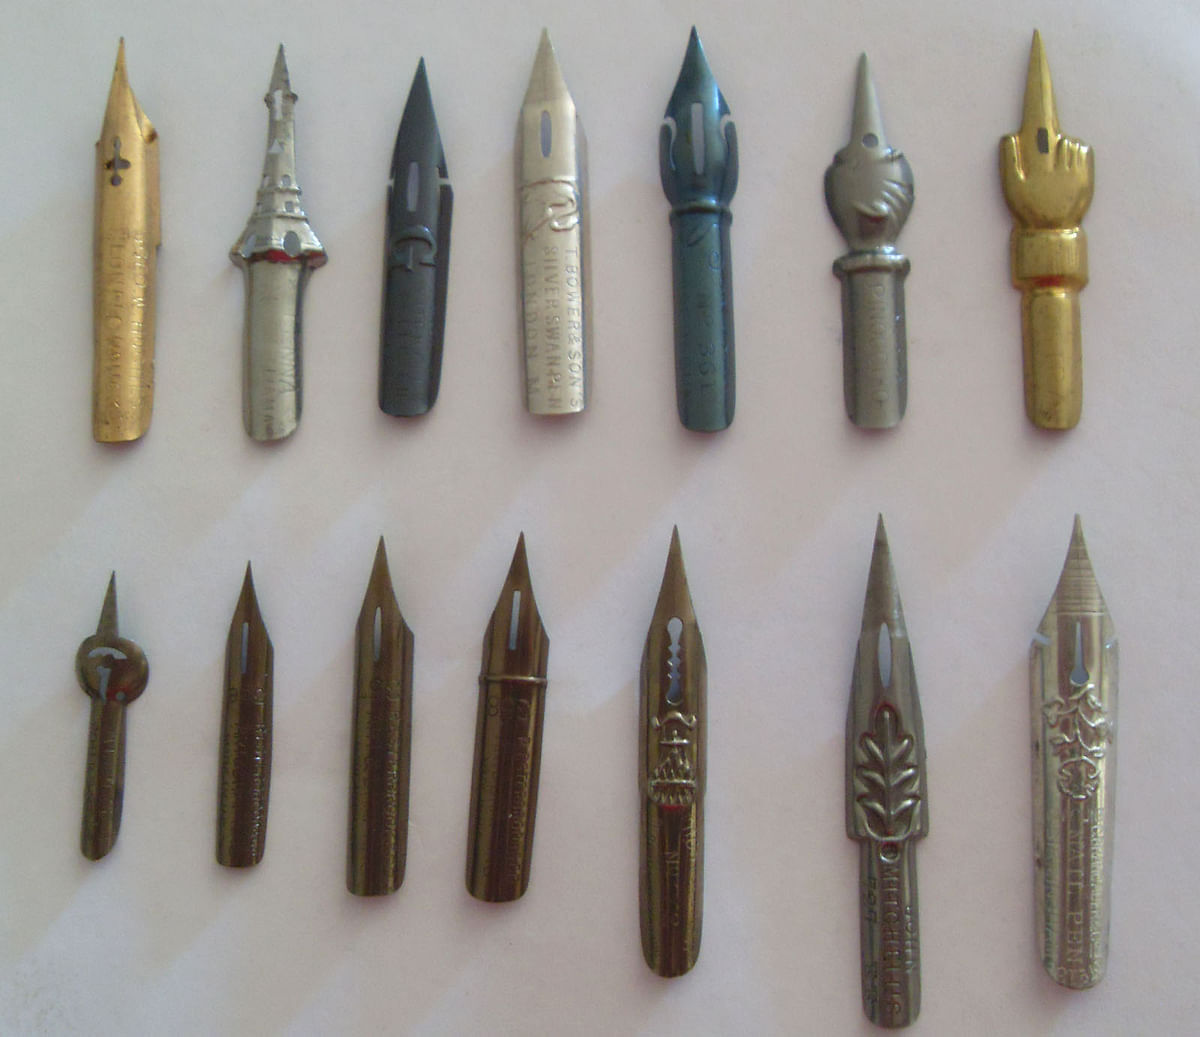 Nibs used by Late Prem Behari for writing the Constitution of India. (Photo courtesy: <a href="https://plus.google.com/photos/118092972326422169139/album/6314152193423462449/6314152193881565442?authkey=CJmN3tqhiuTQswE">Prem Foundation</a>) 